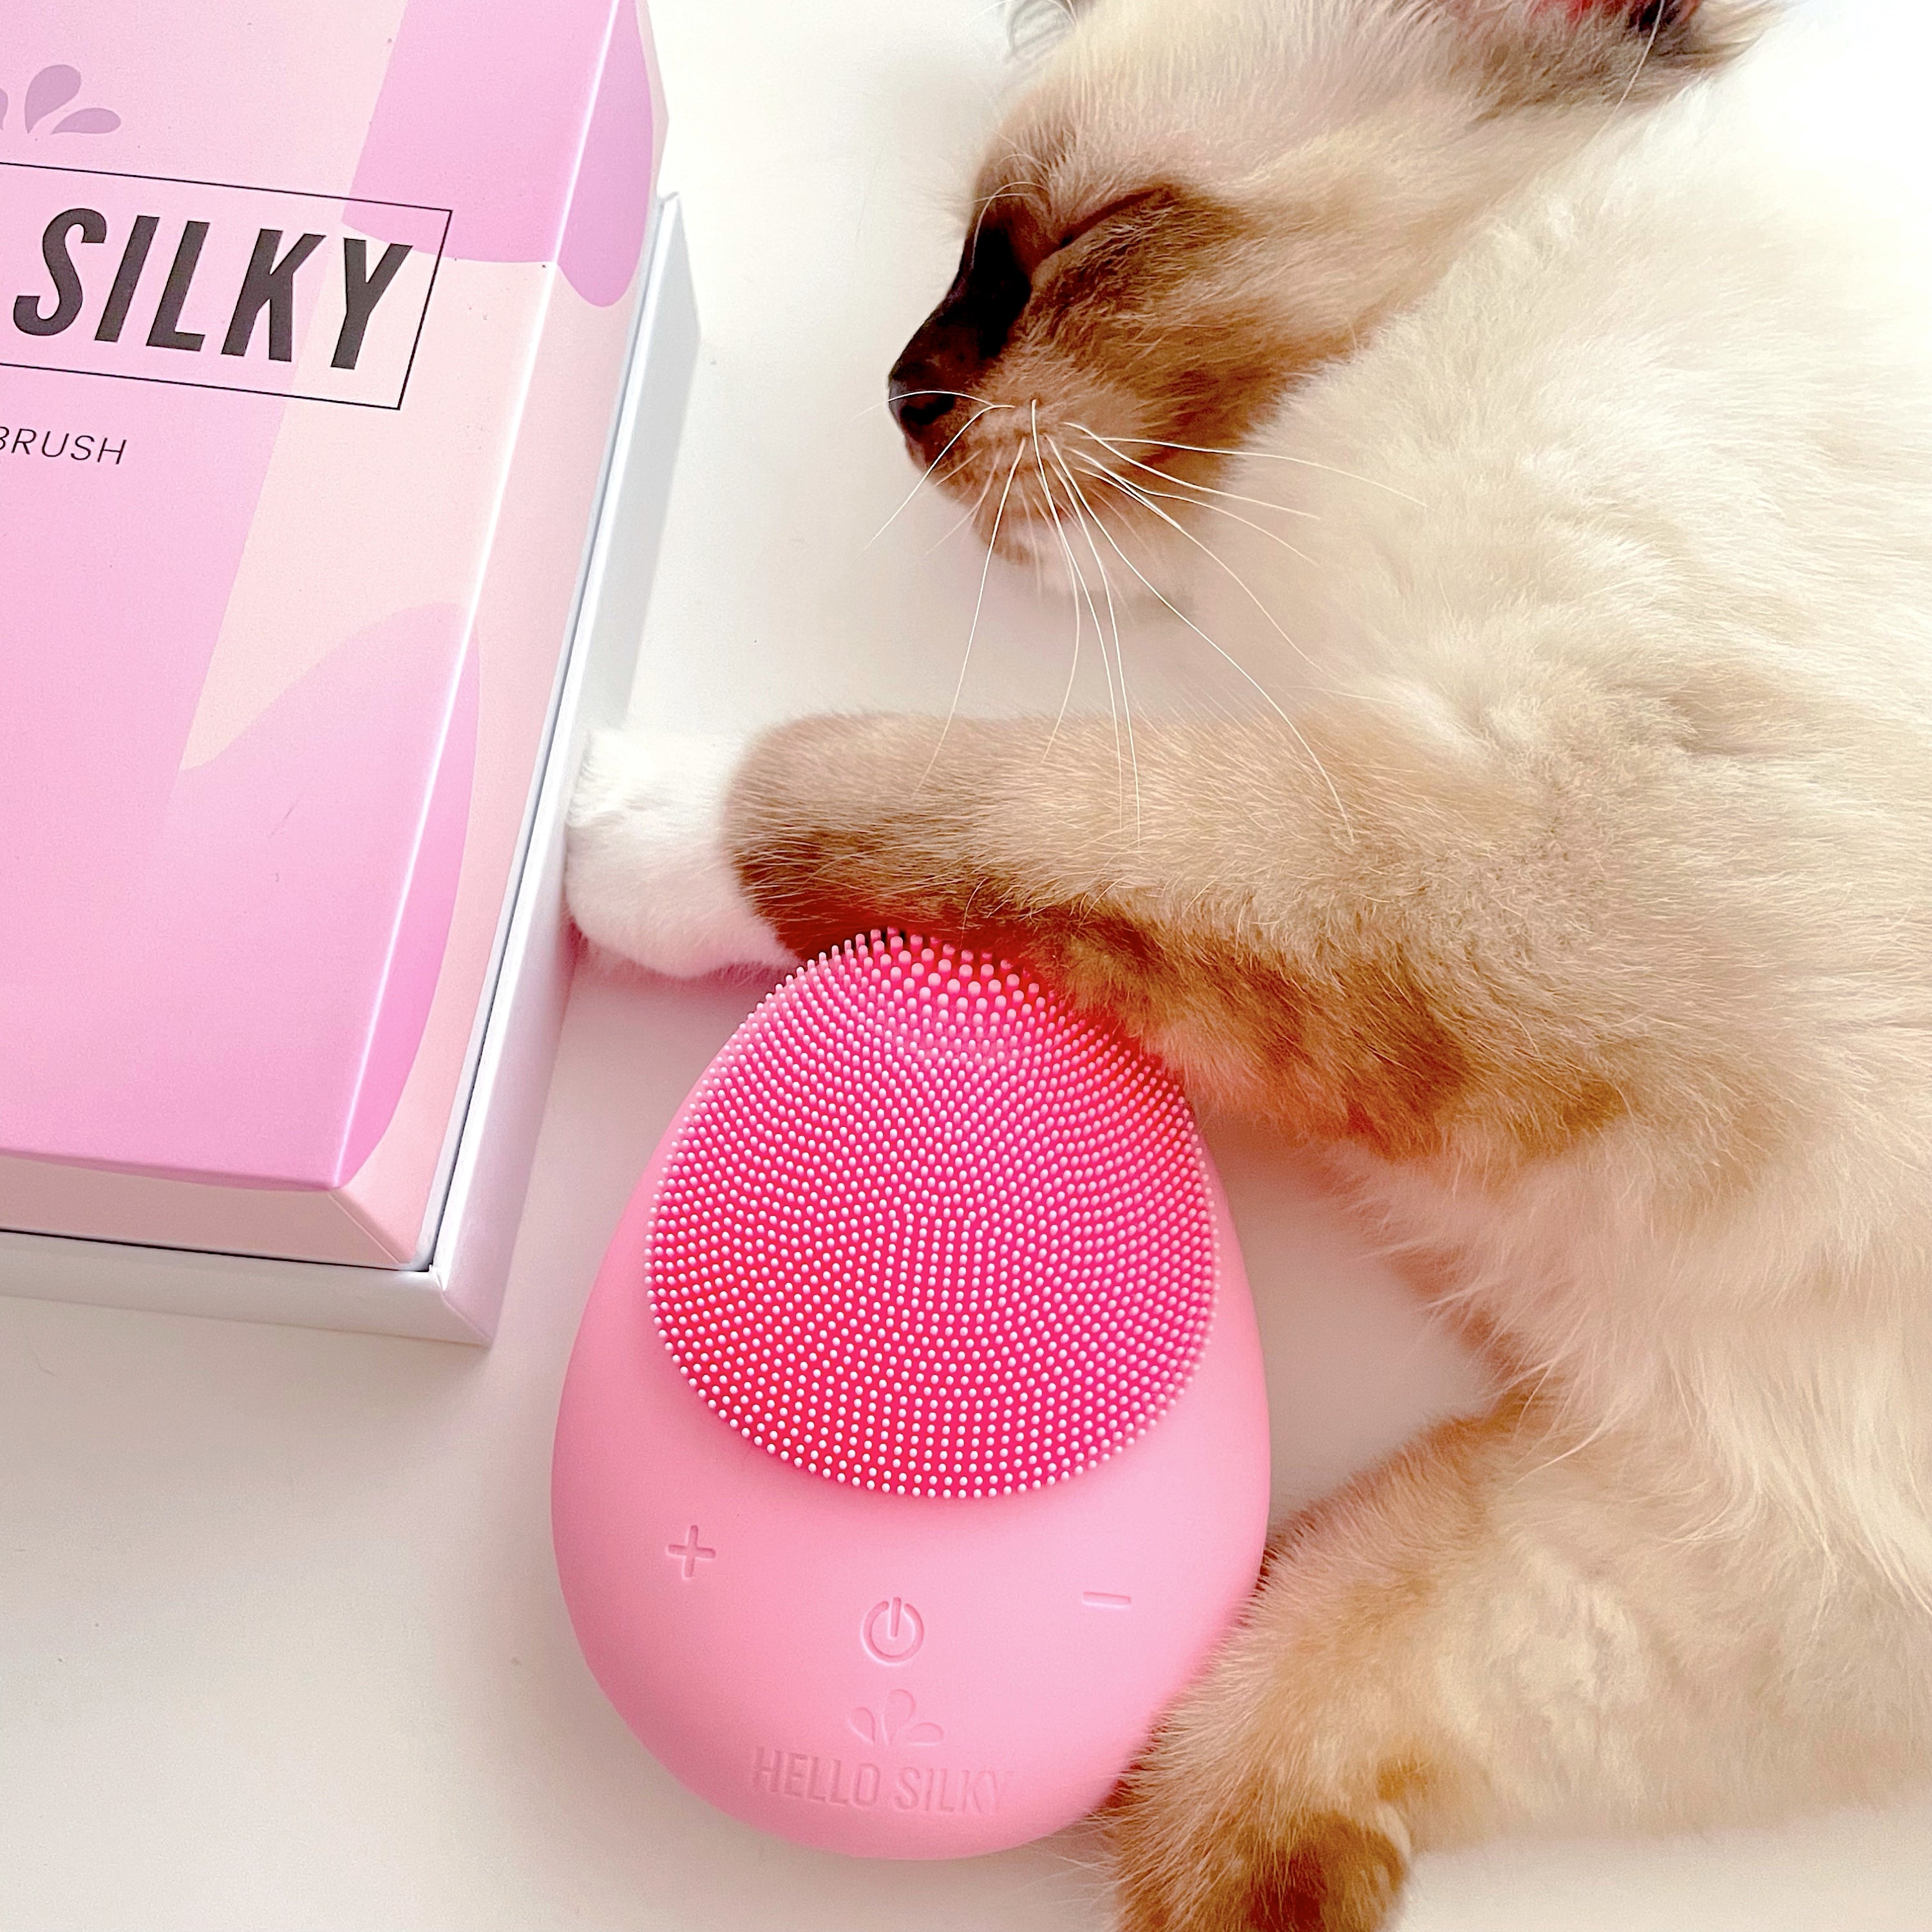 Hello Silky Cleansing Brush